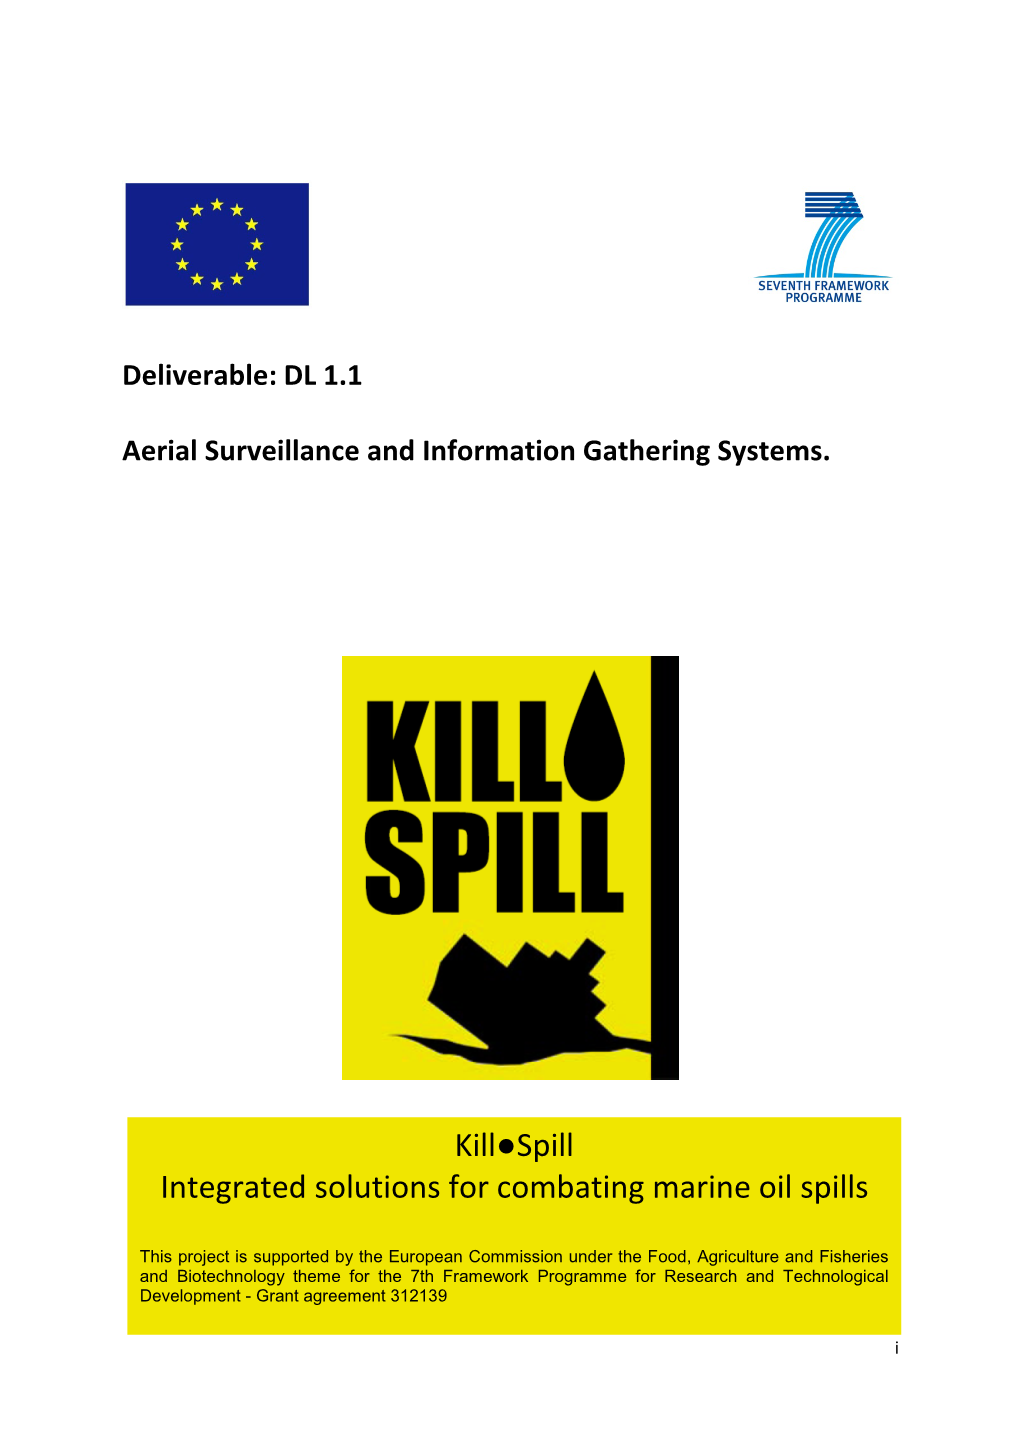 Kill Spill Integrated Solutions for Combating Marine Oil Spills